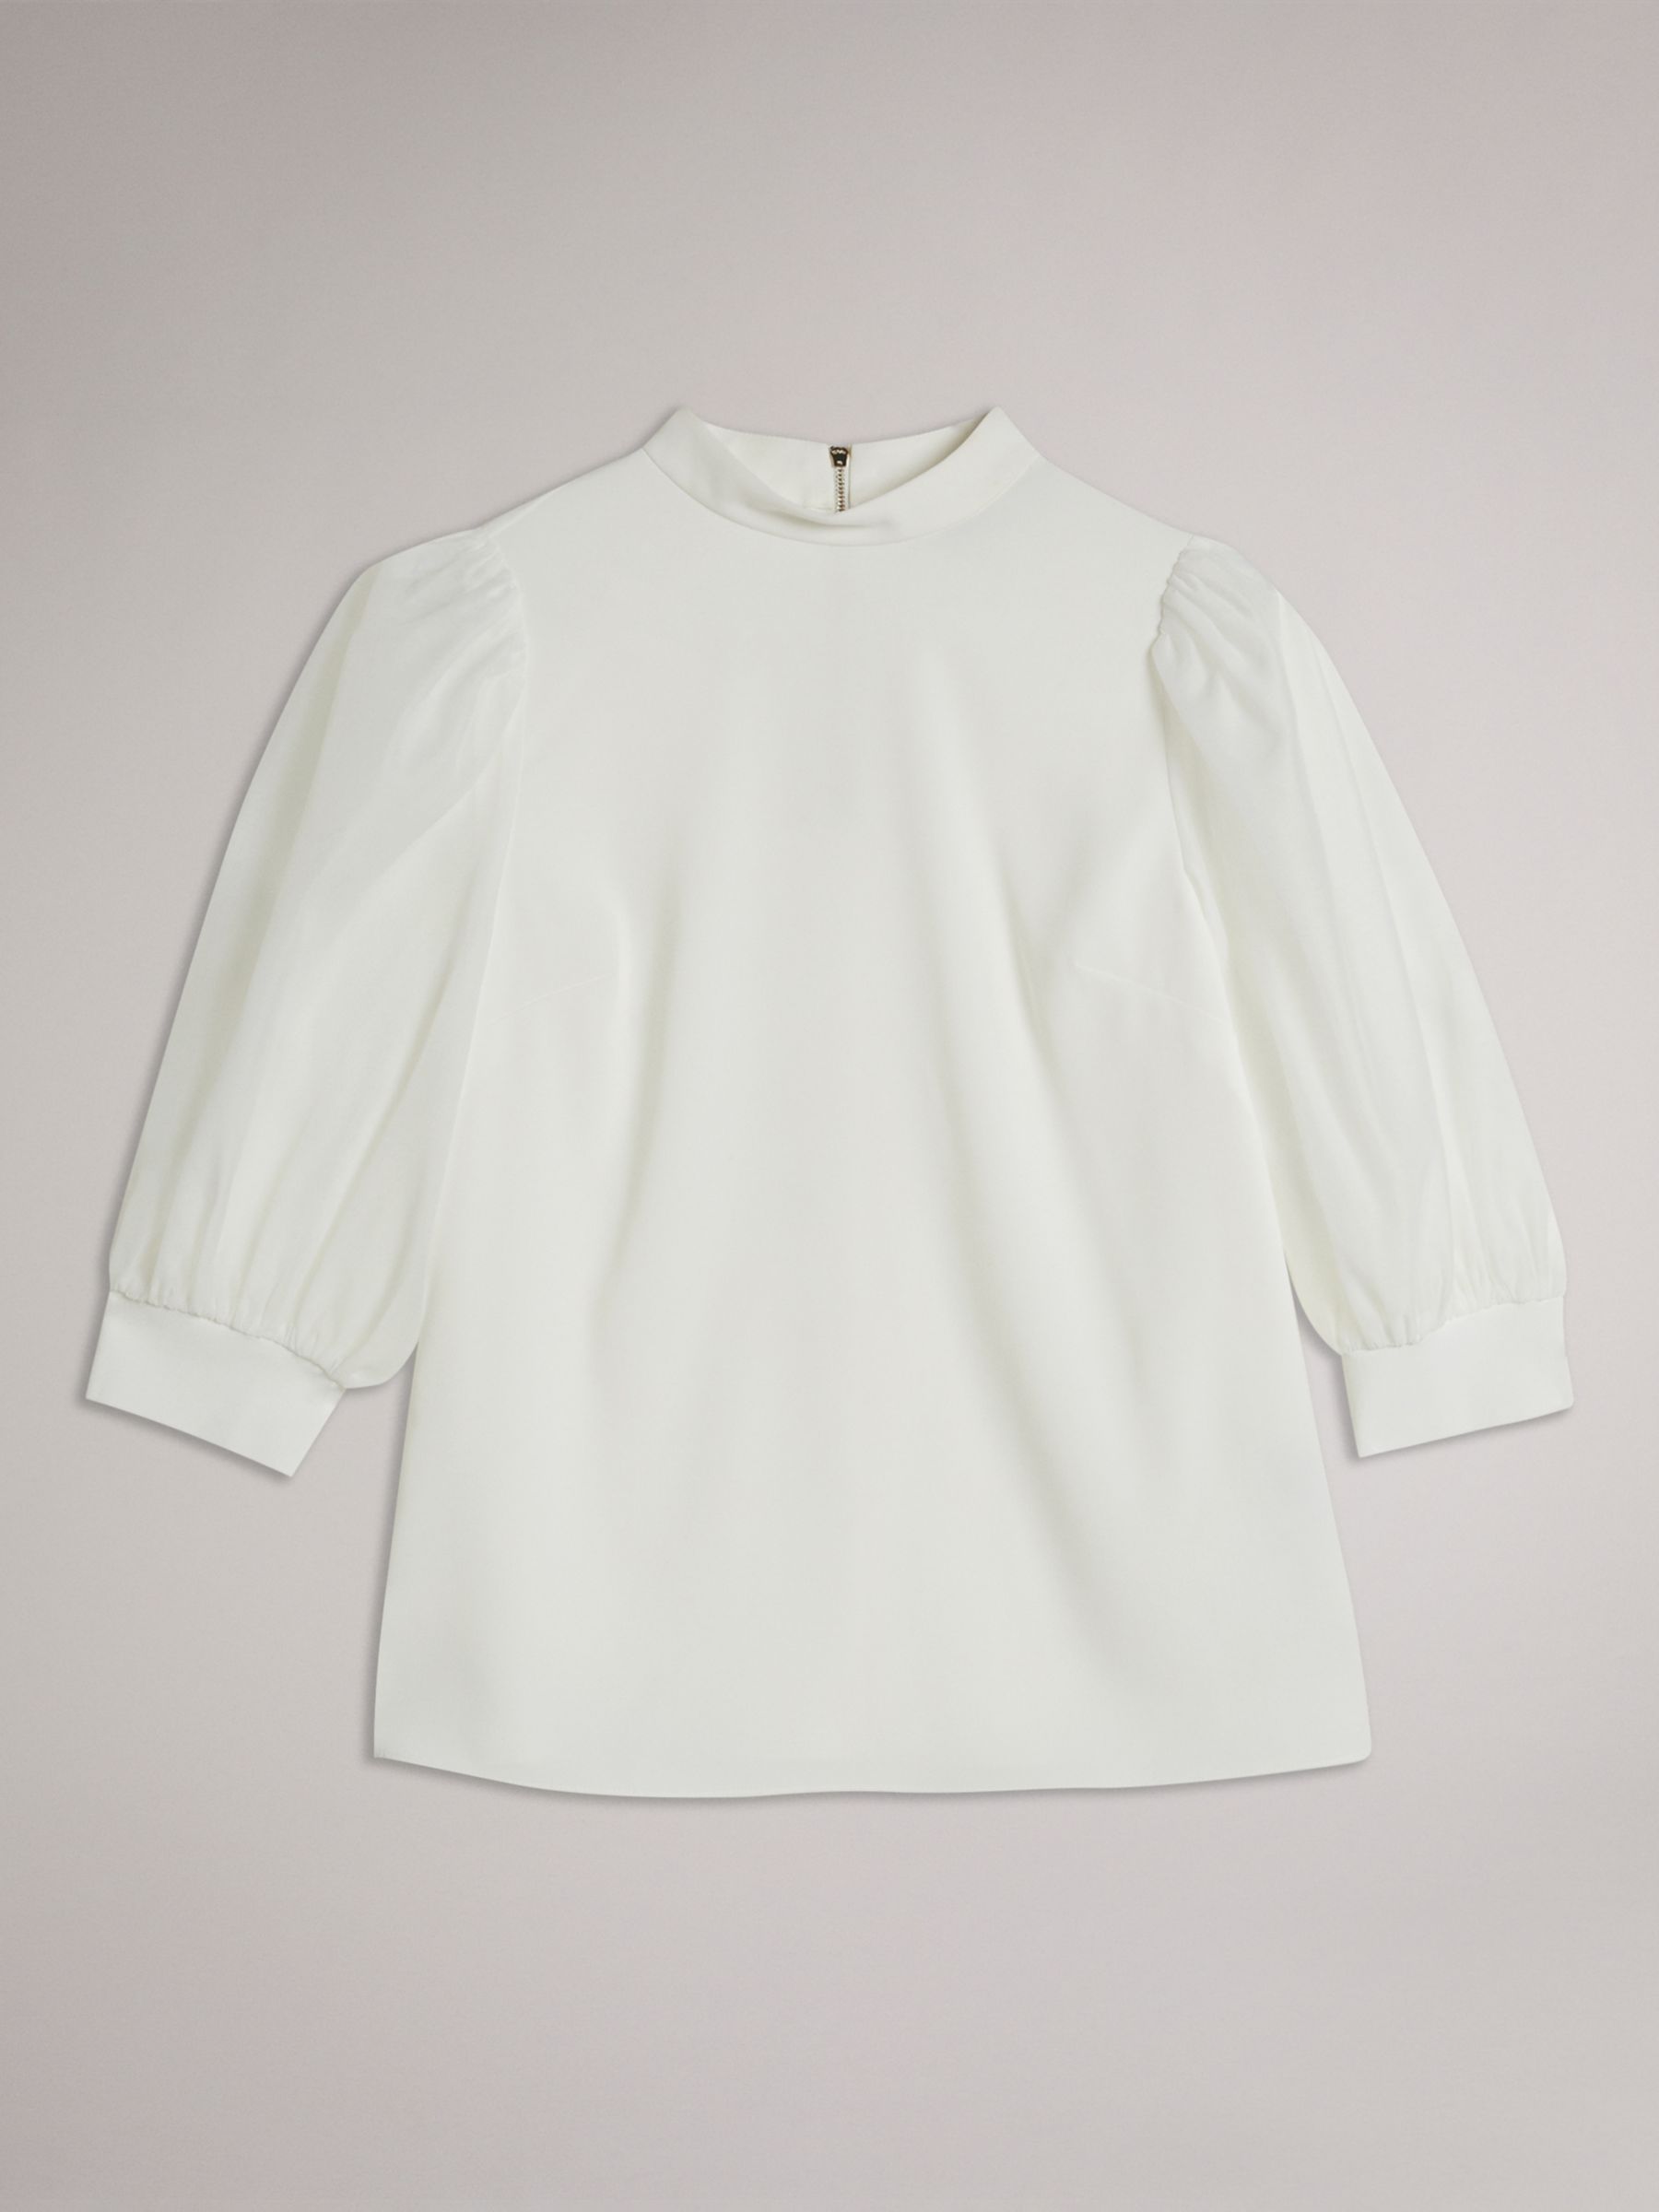 Ted Baker Micaeli Organza Puff Sleeve Top, White at John Lewis & Partners